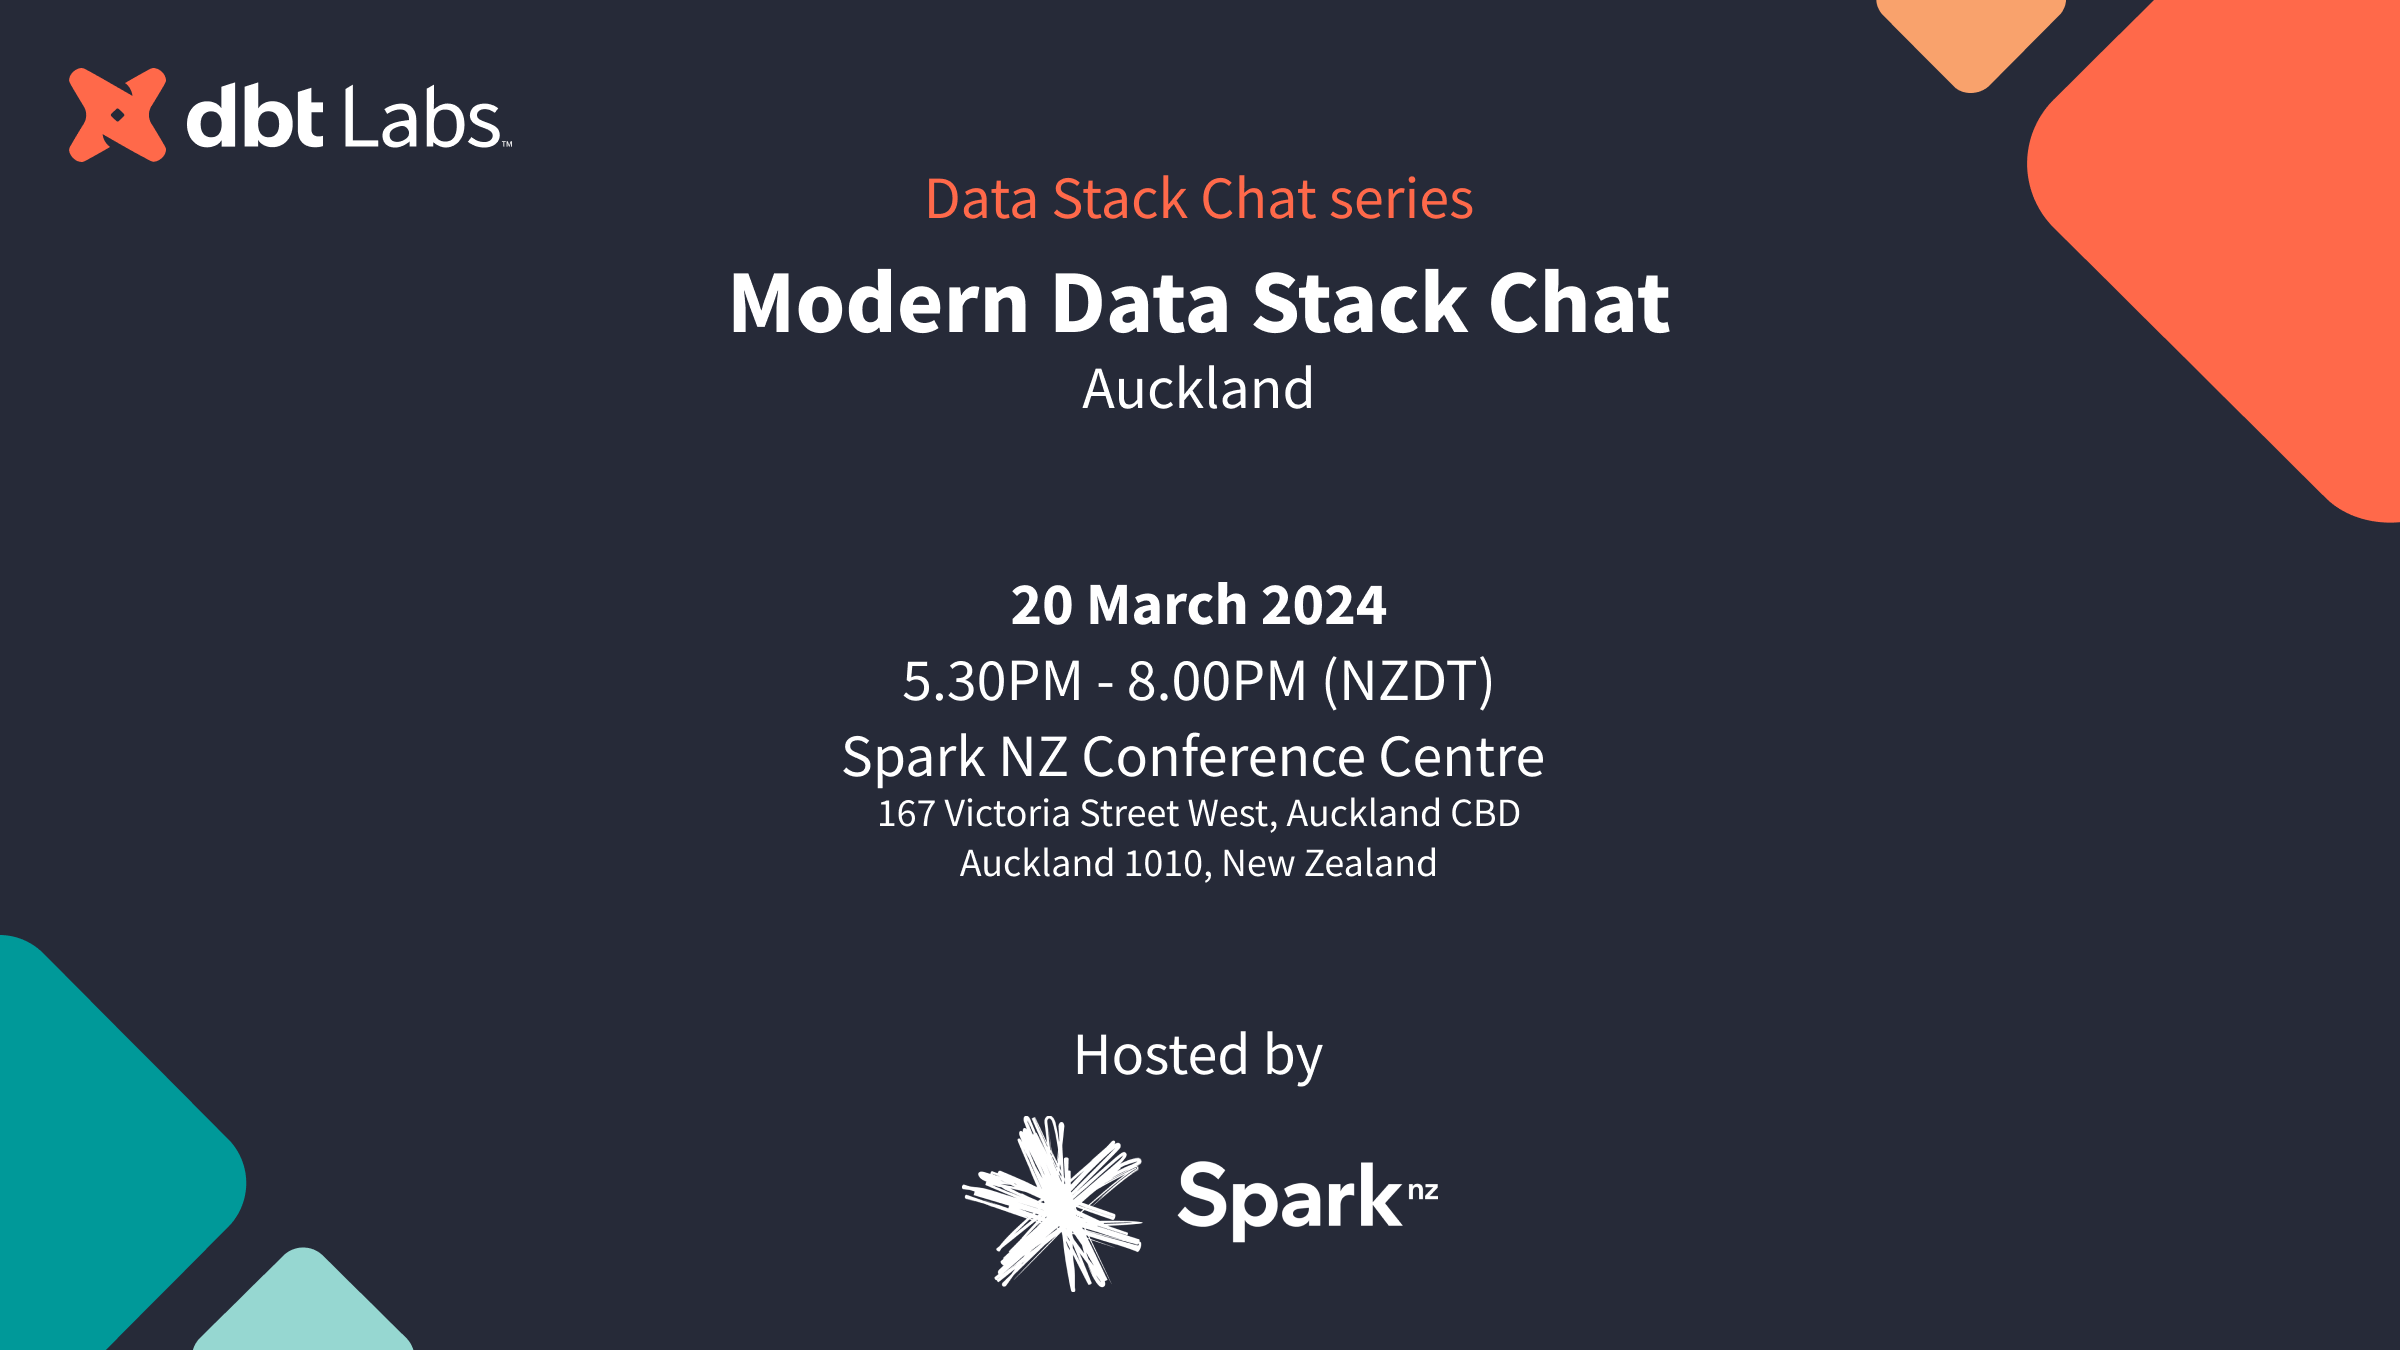 Modern Data Stack Chat at Spark NZ Auckland